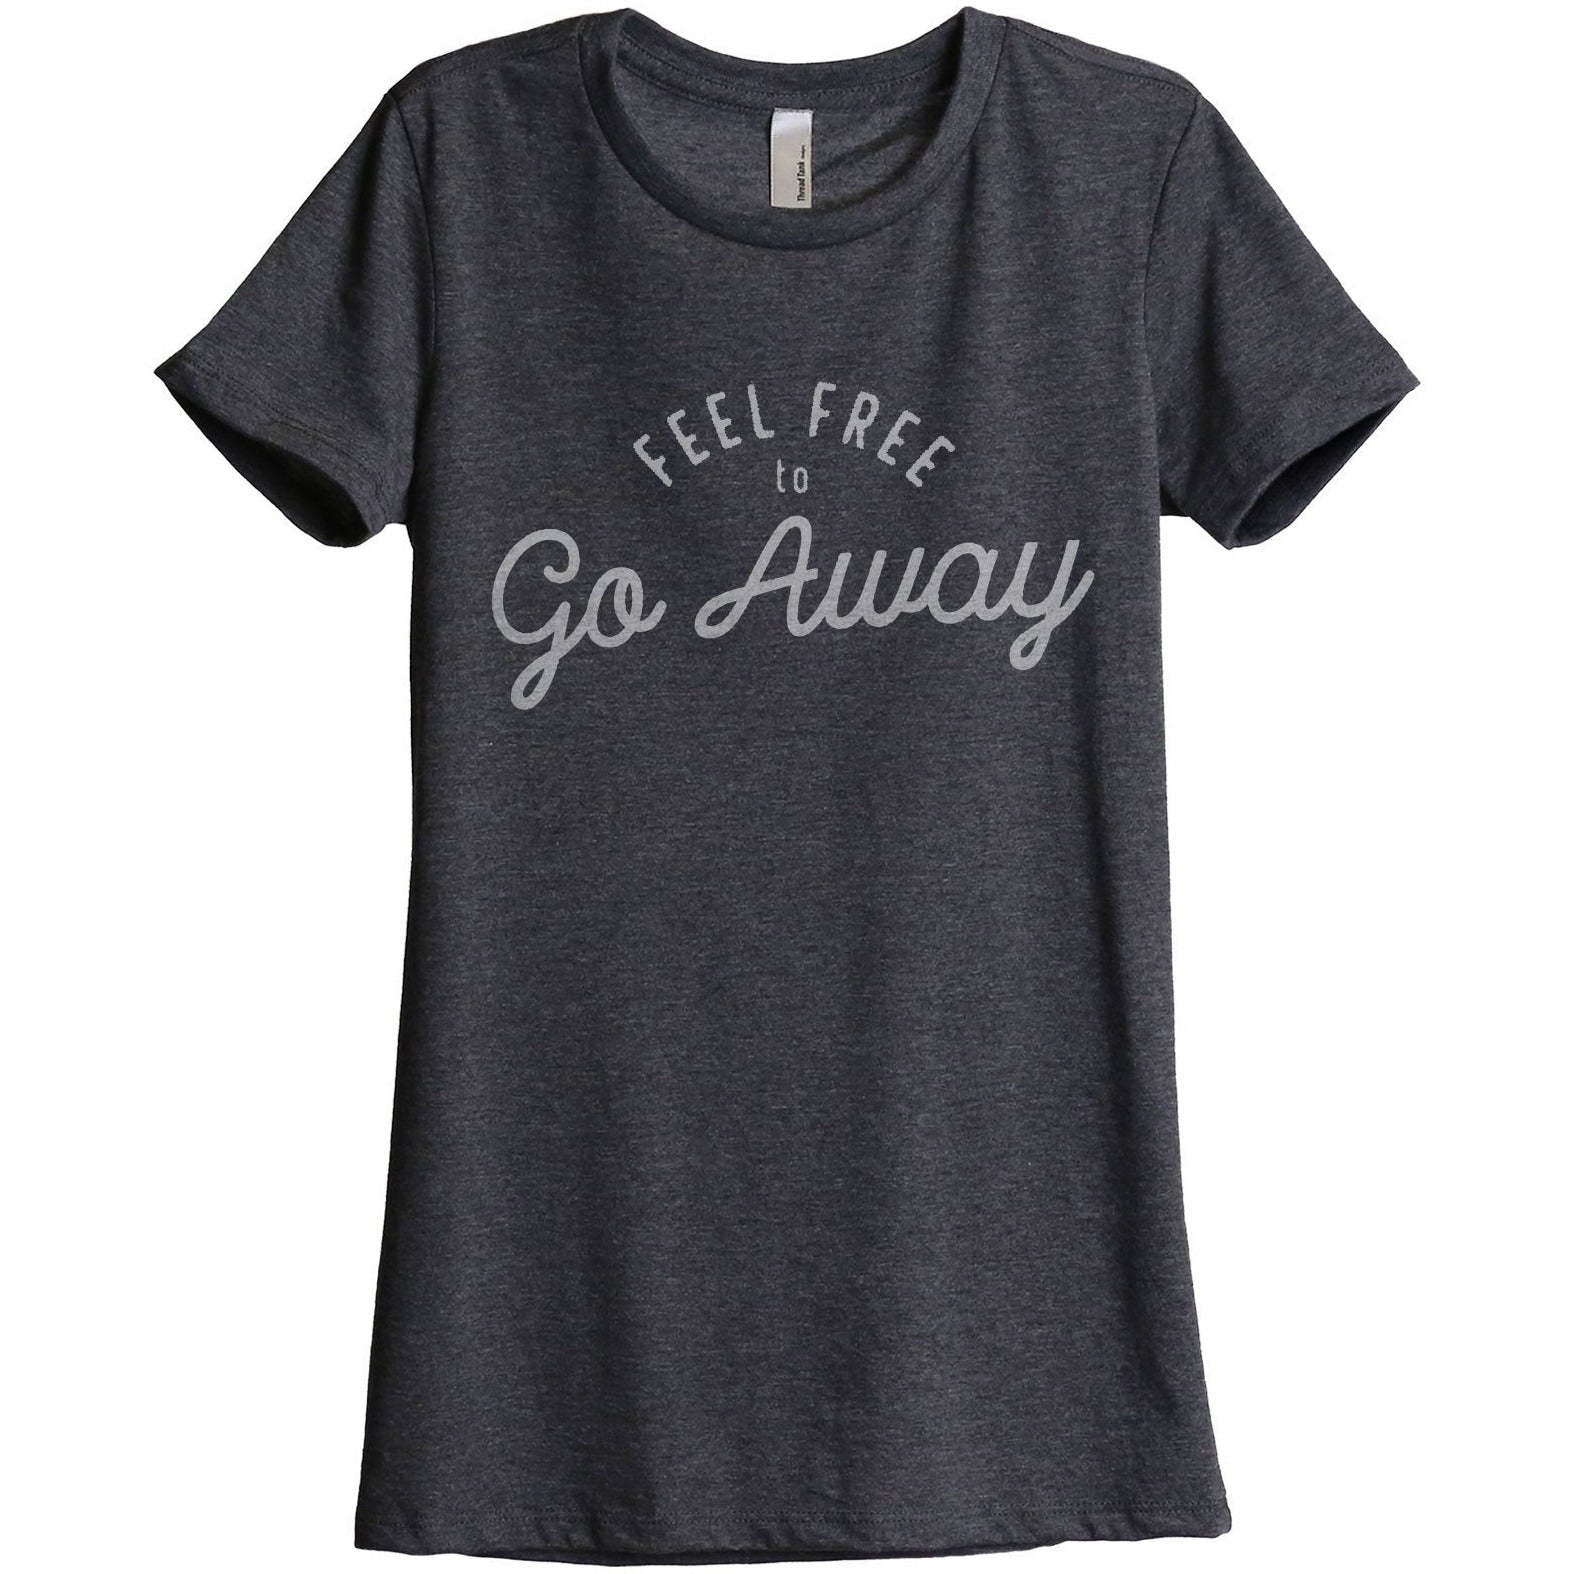 Feel Free To Go Away Women's Relaxed Crewneck T-Shirt Top Tee Charcoal Grey
